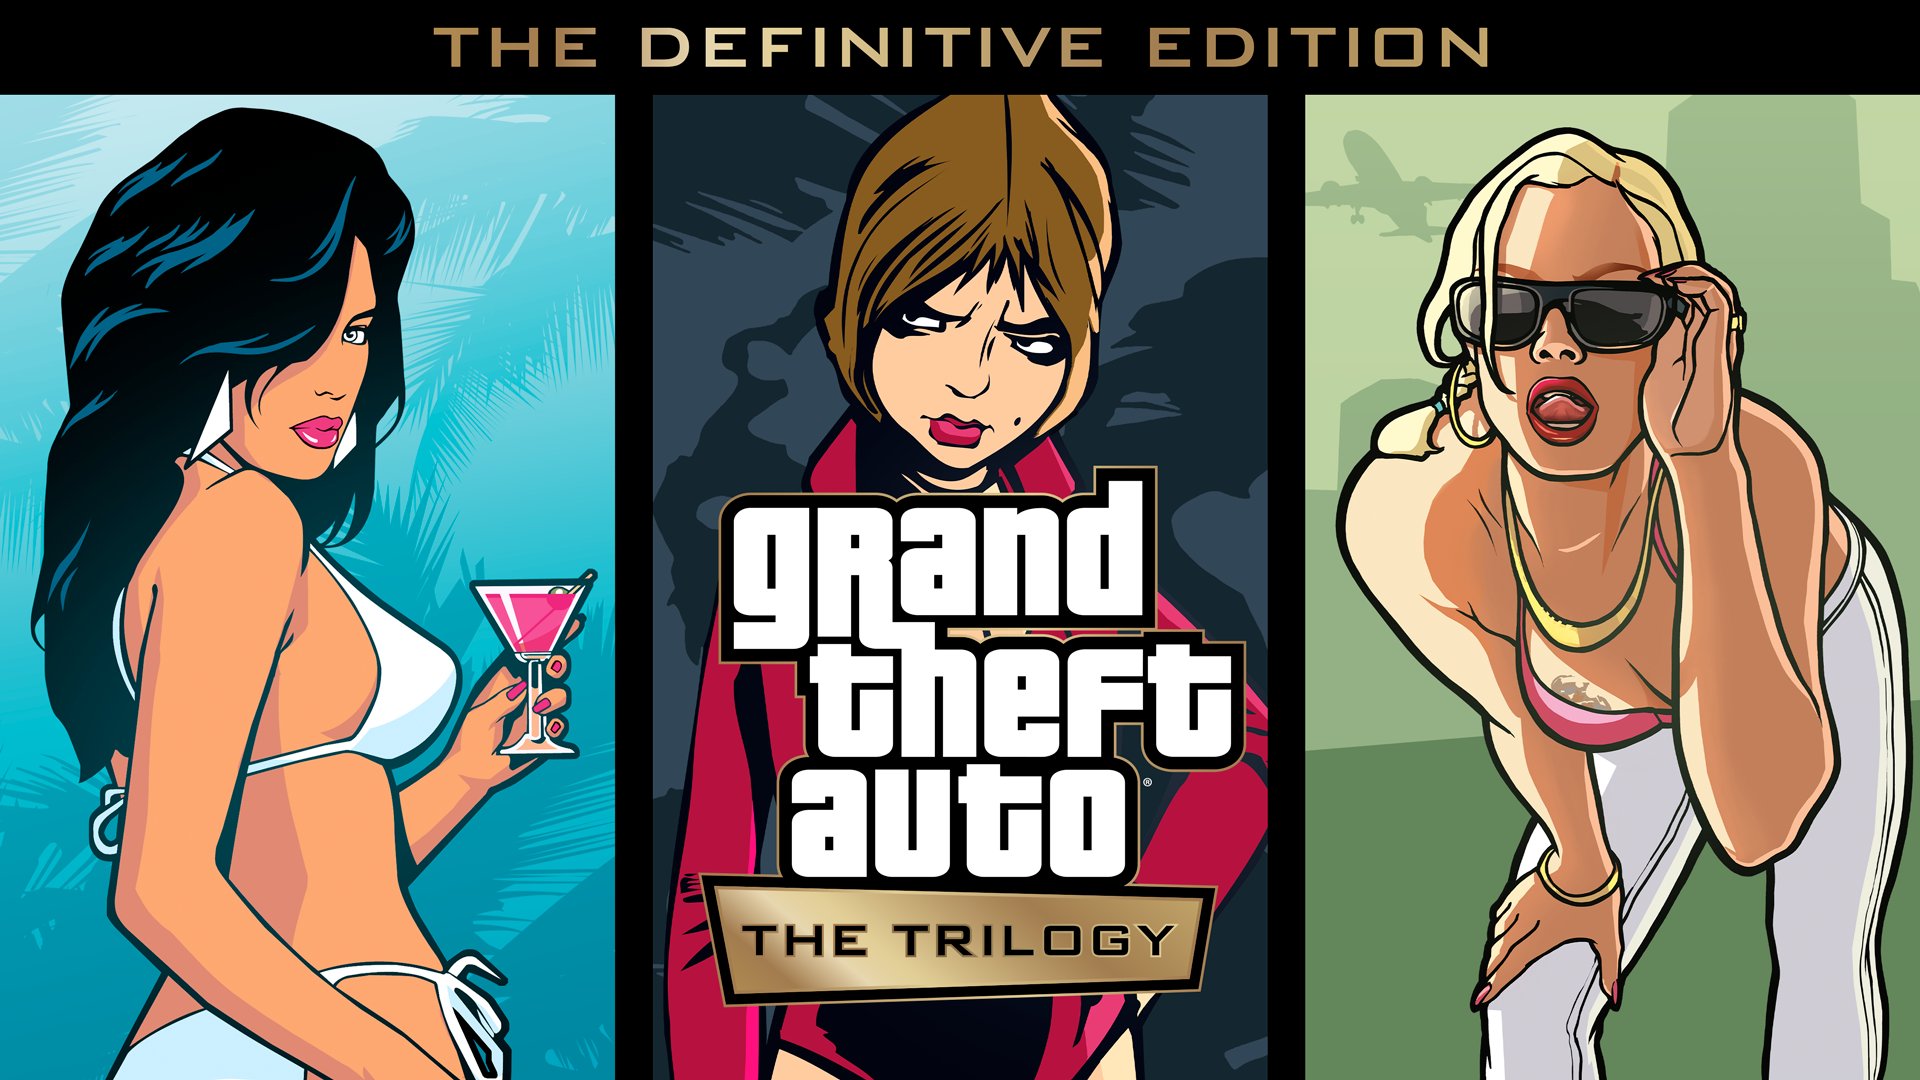 grand theft auto: san andreas, video game, grand theft auto, grand theft auto iii, grand theft auto: the trilogy the definitive edition, grand theft auto: vice city